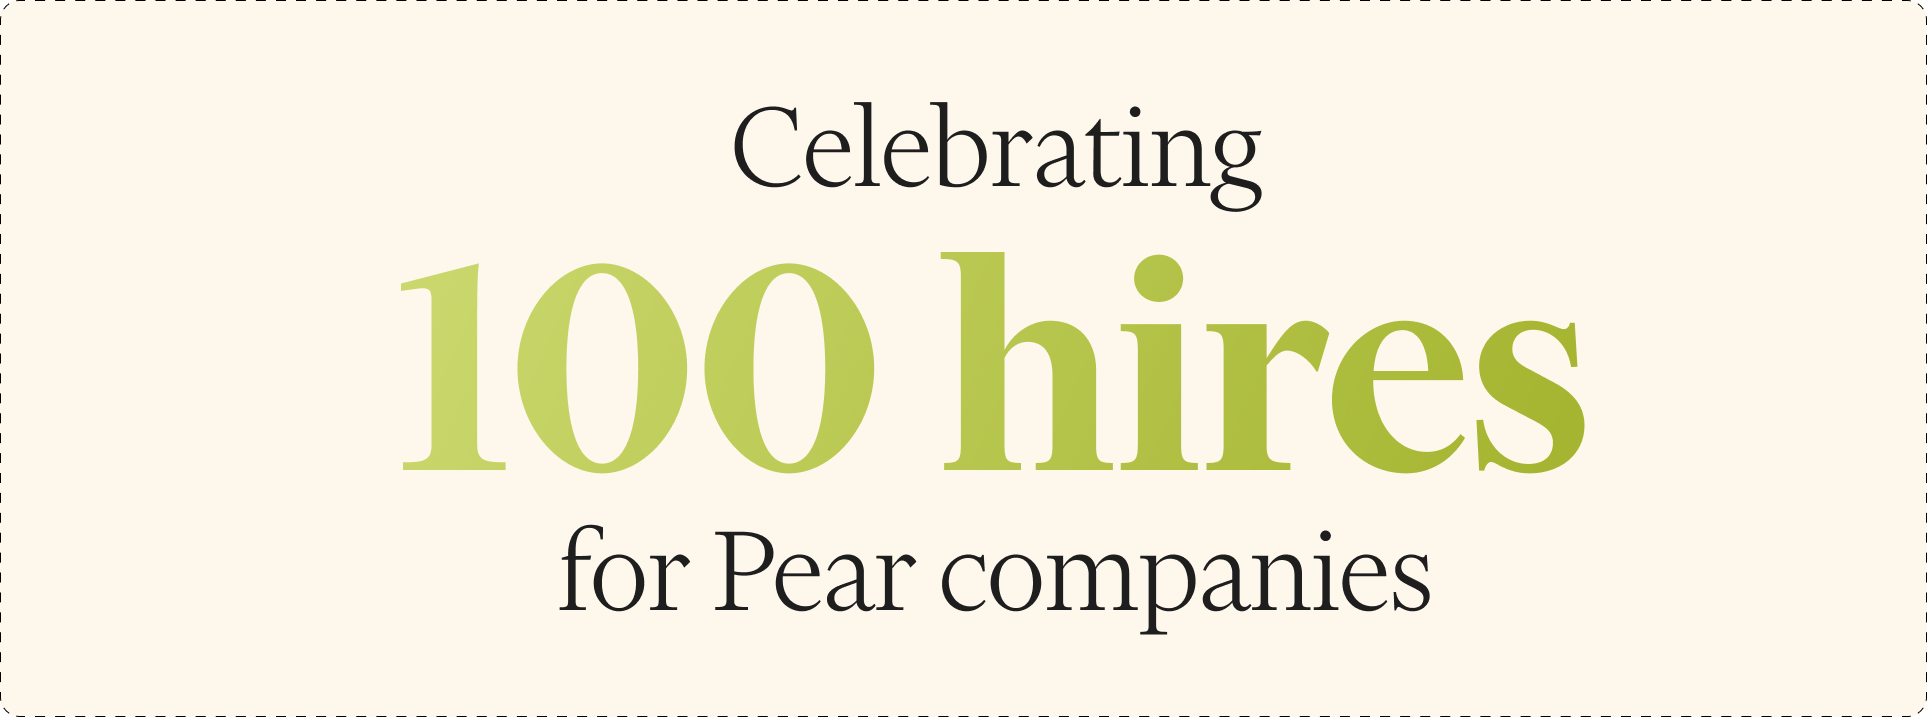 resources Celebrating 100 hires for Pear companies 🥳